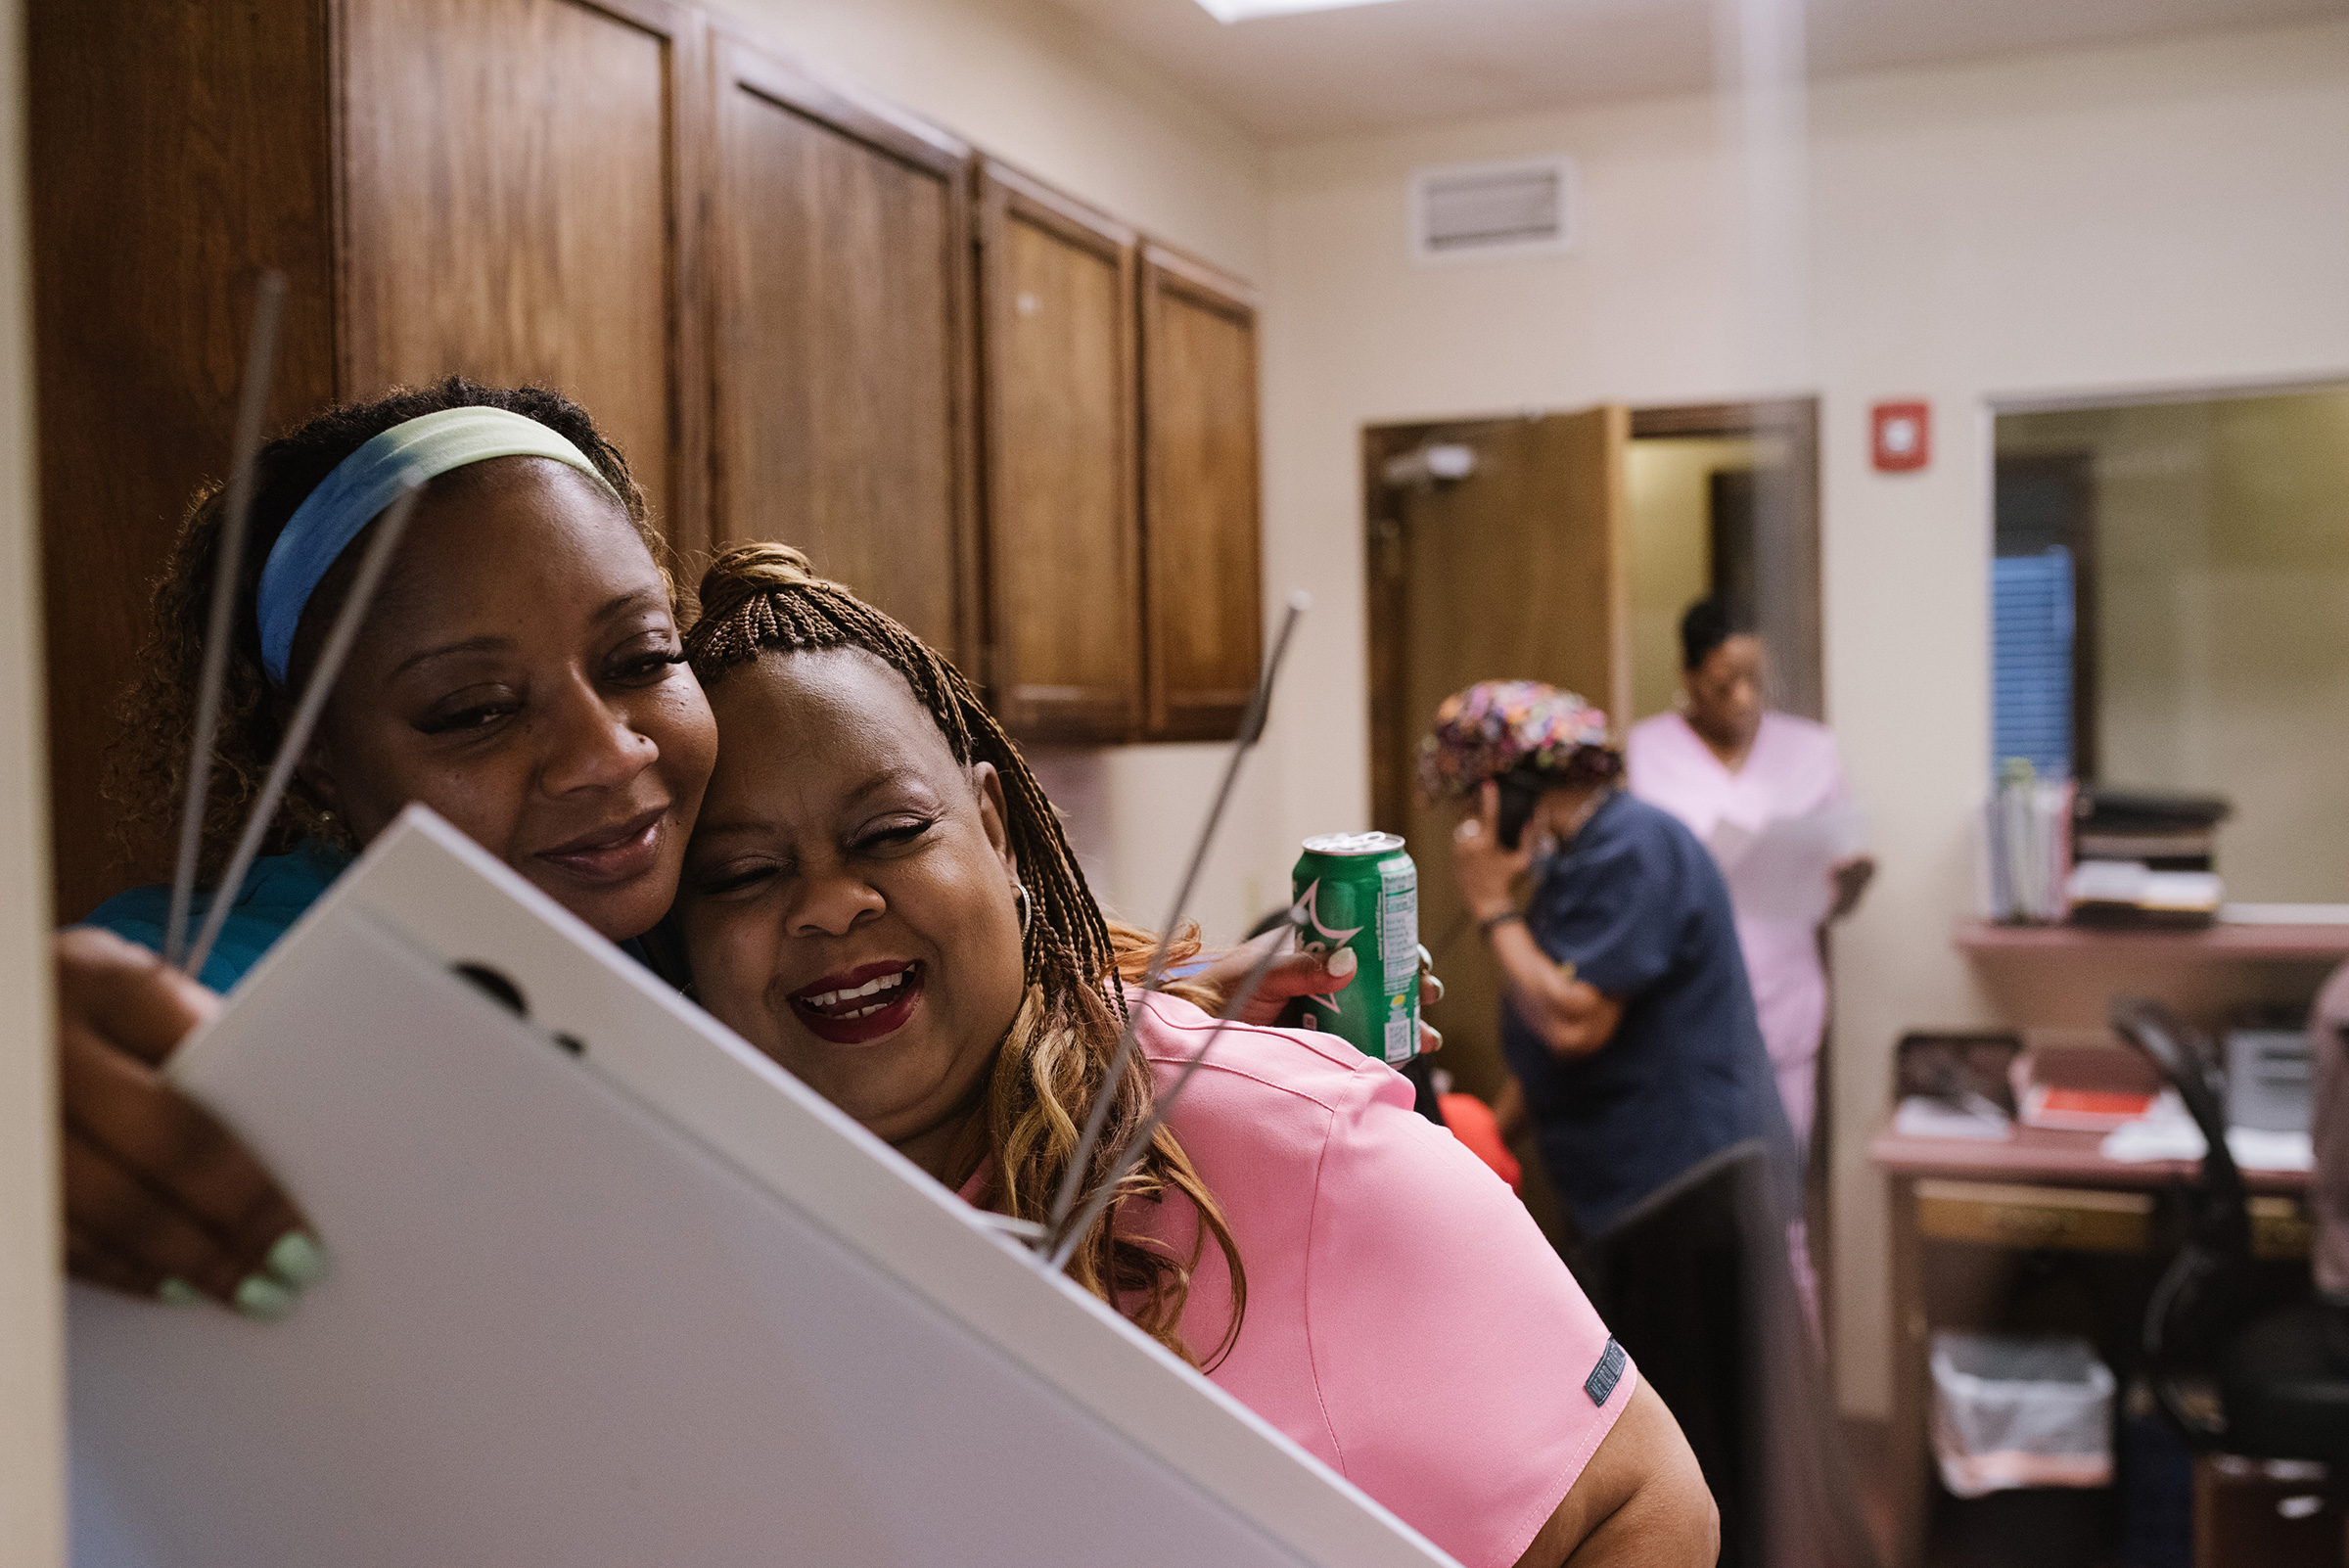 Medical assistant Ramona Wallace, left, embraces Gail Latham on July 11.